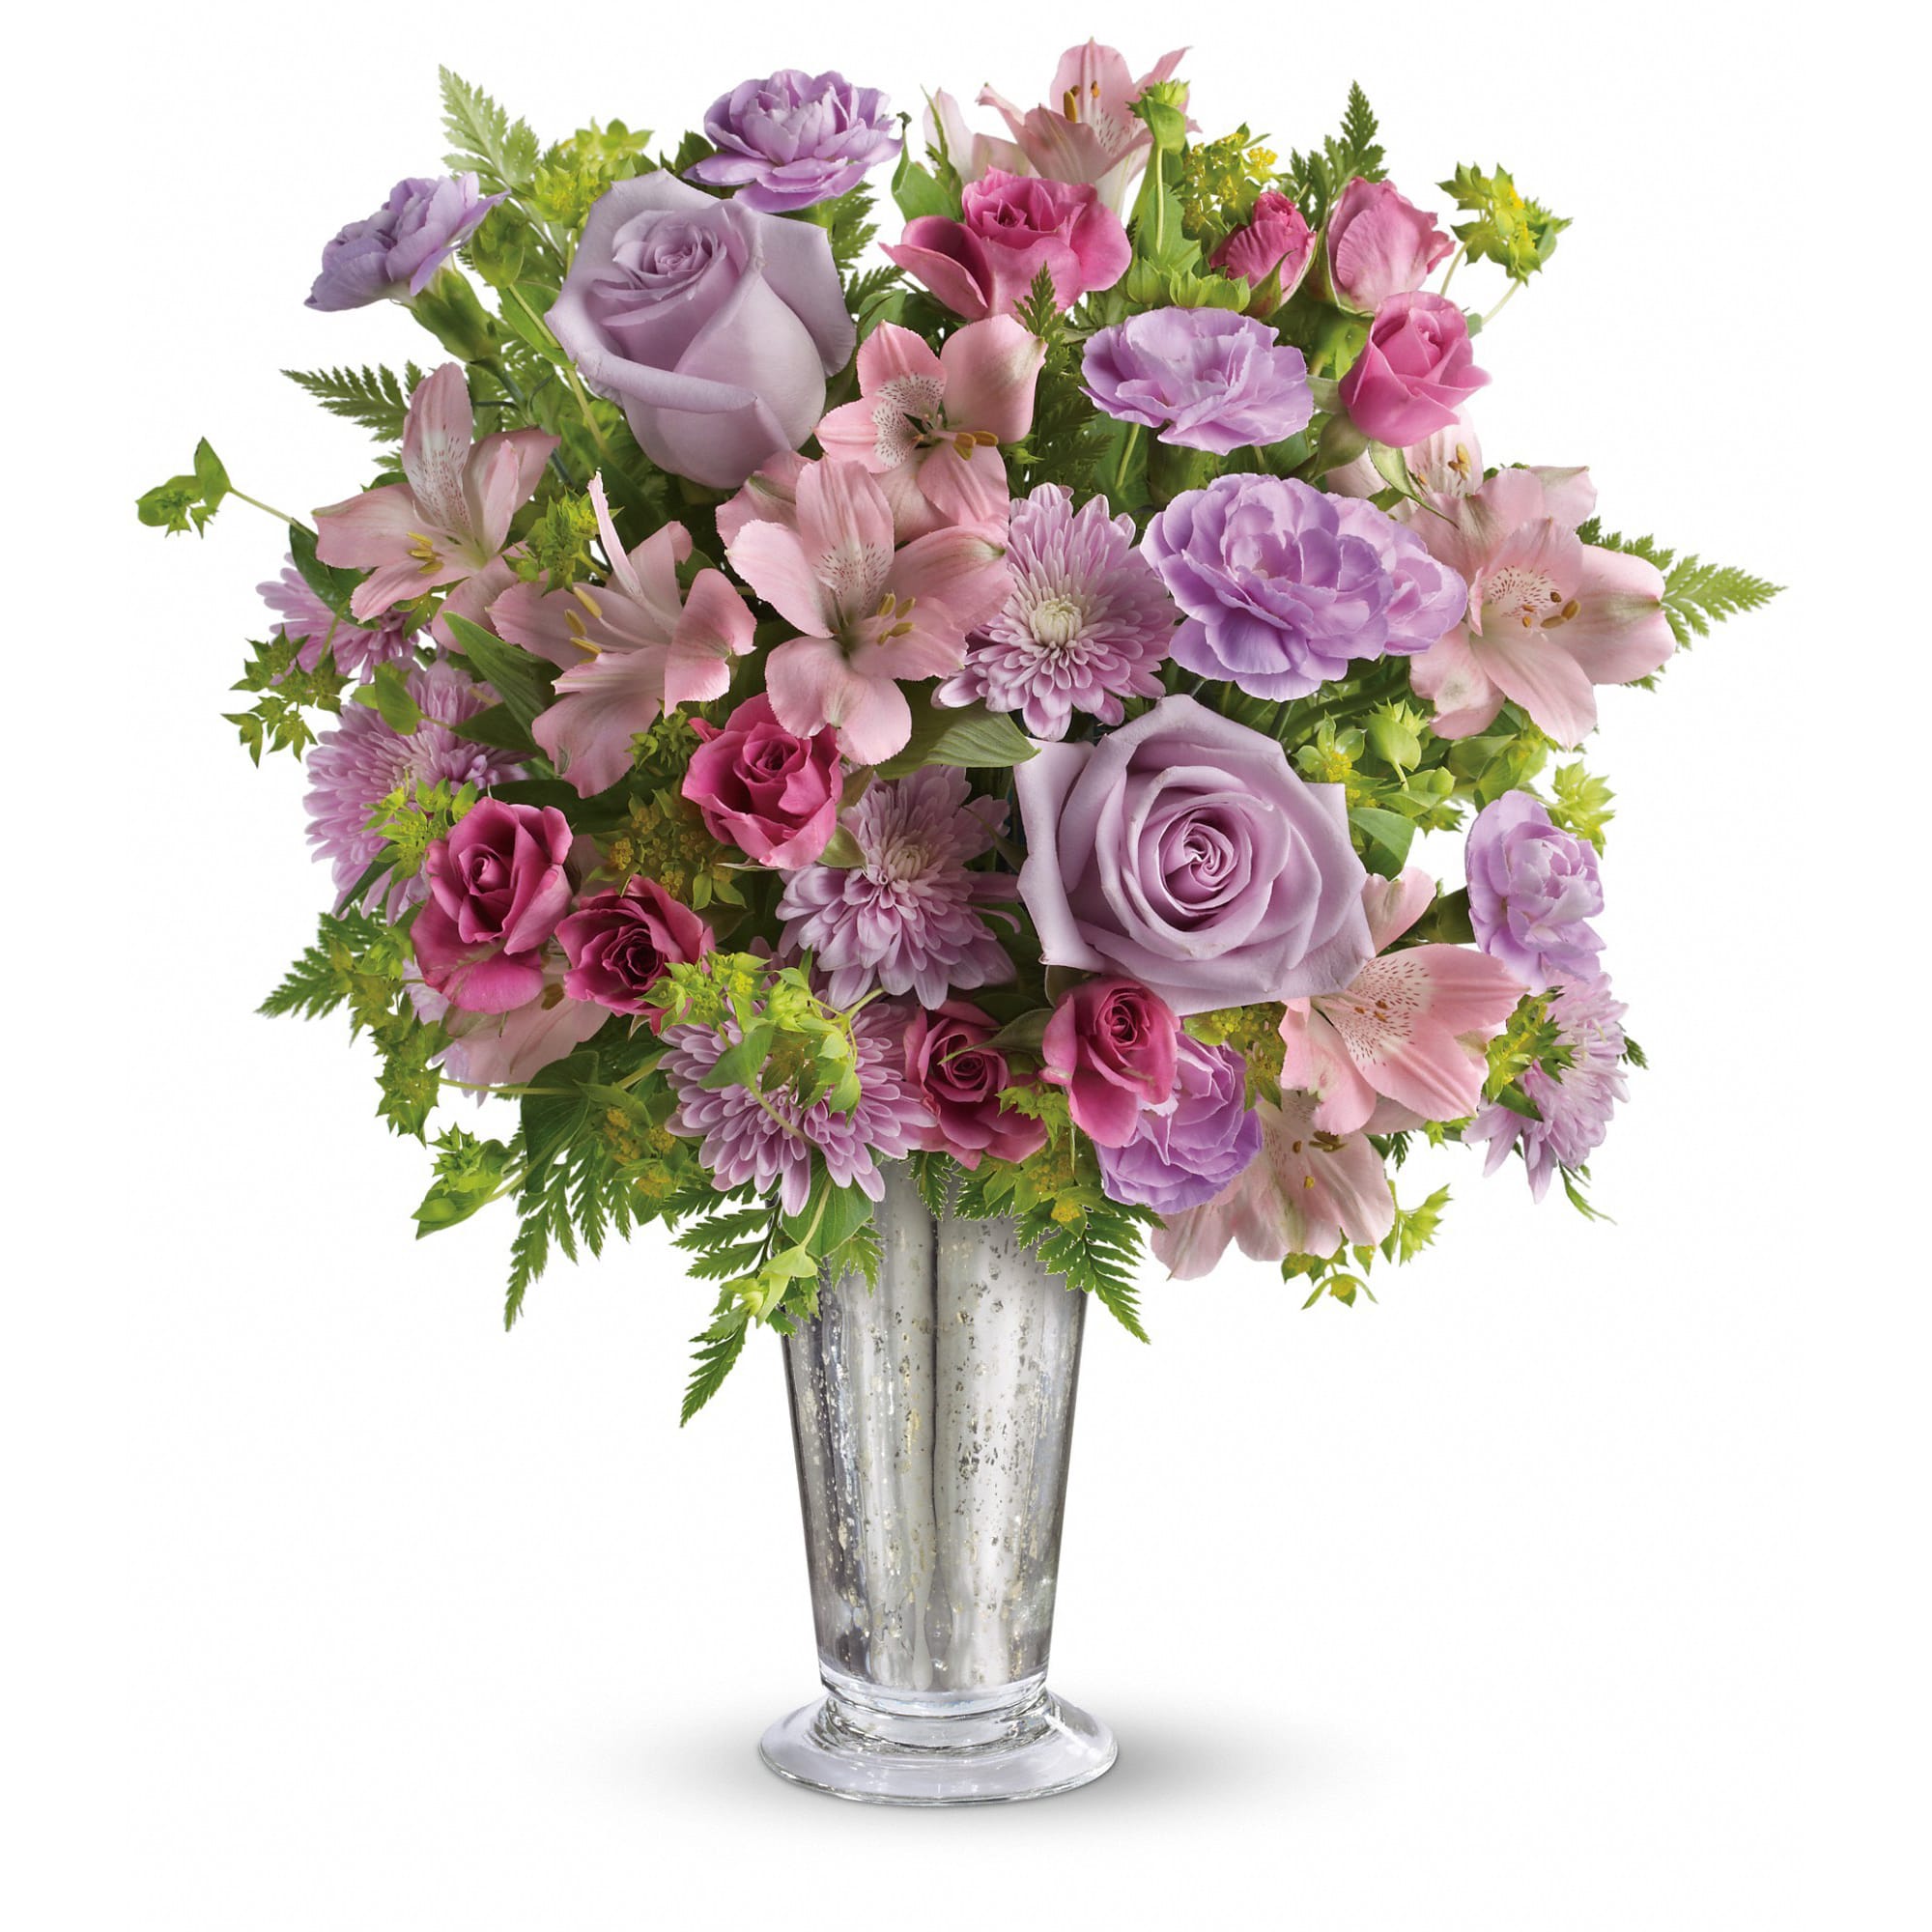 Sheer Delight Bouquet - The essence of femininity. Delight her with flirty-fun lavender and pink blooms presented in a gorgeous Mercury Glass julep vase. It's a gift that will sparkle in her memory forever. 